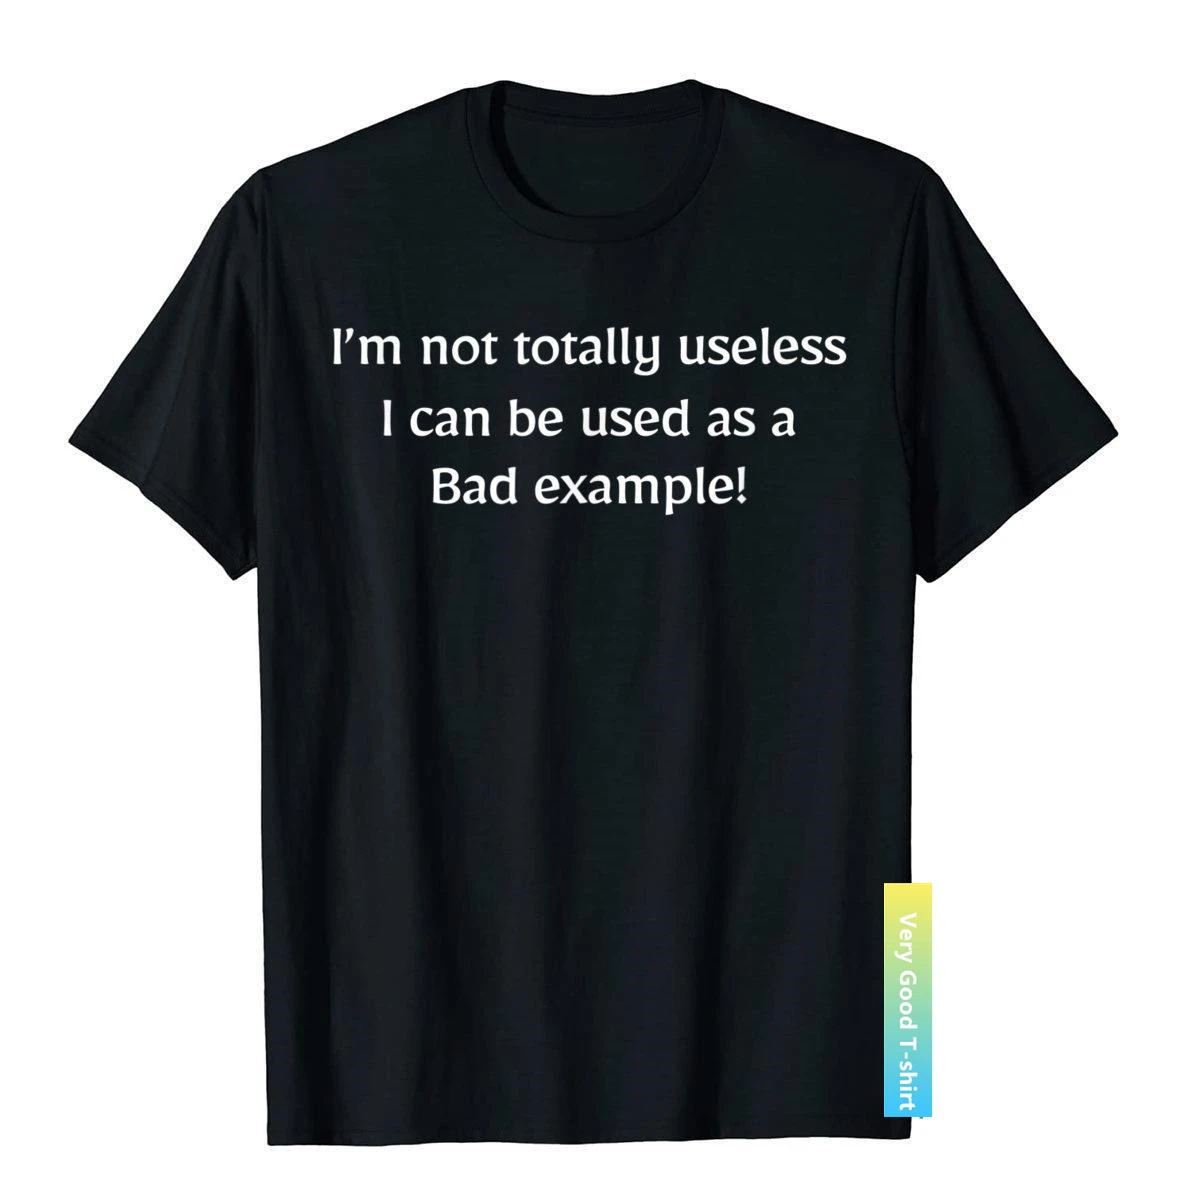 

I'm Not Totally Useless I Can Be Used As A Bad Example Funny T-Shirt T Shirt Latest Party Cotton Men Tops Shirts Printing